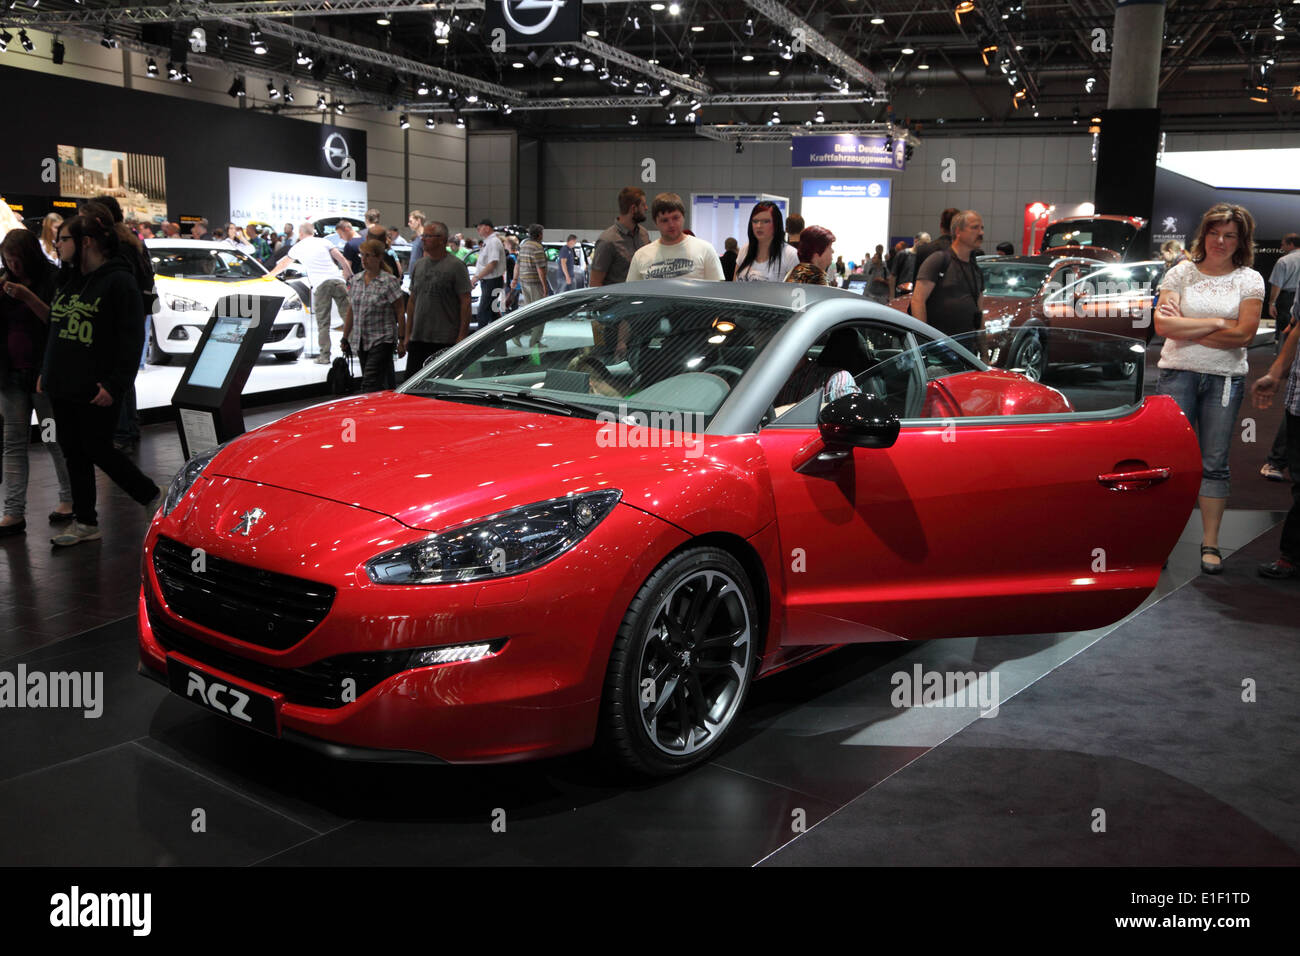 Peugeot RCZ sports car at the AMI - Auto Mobile International Trade Fair on June 1st, 2014 in Leipzig, Saxony, Germany Stock Photo